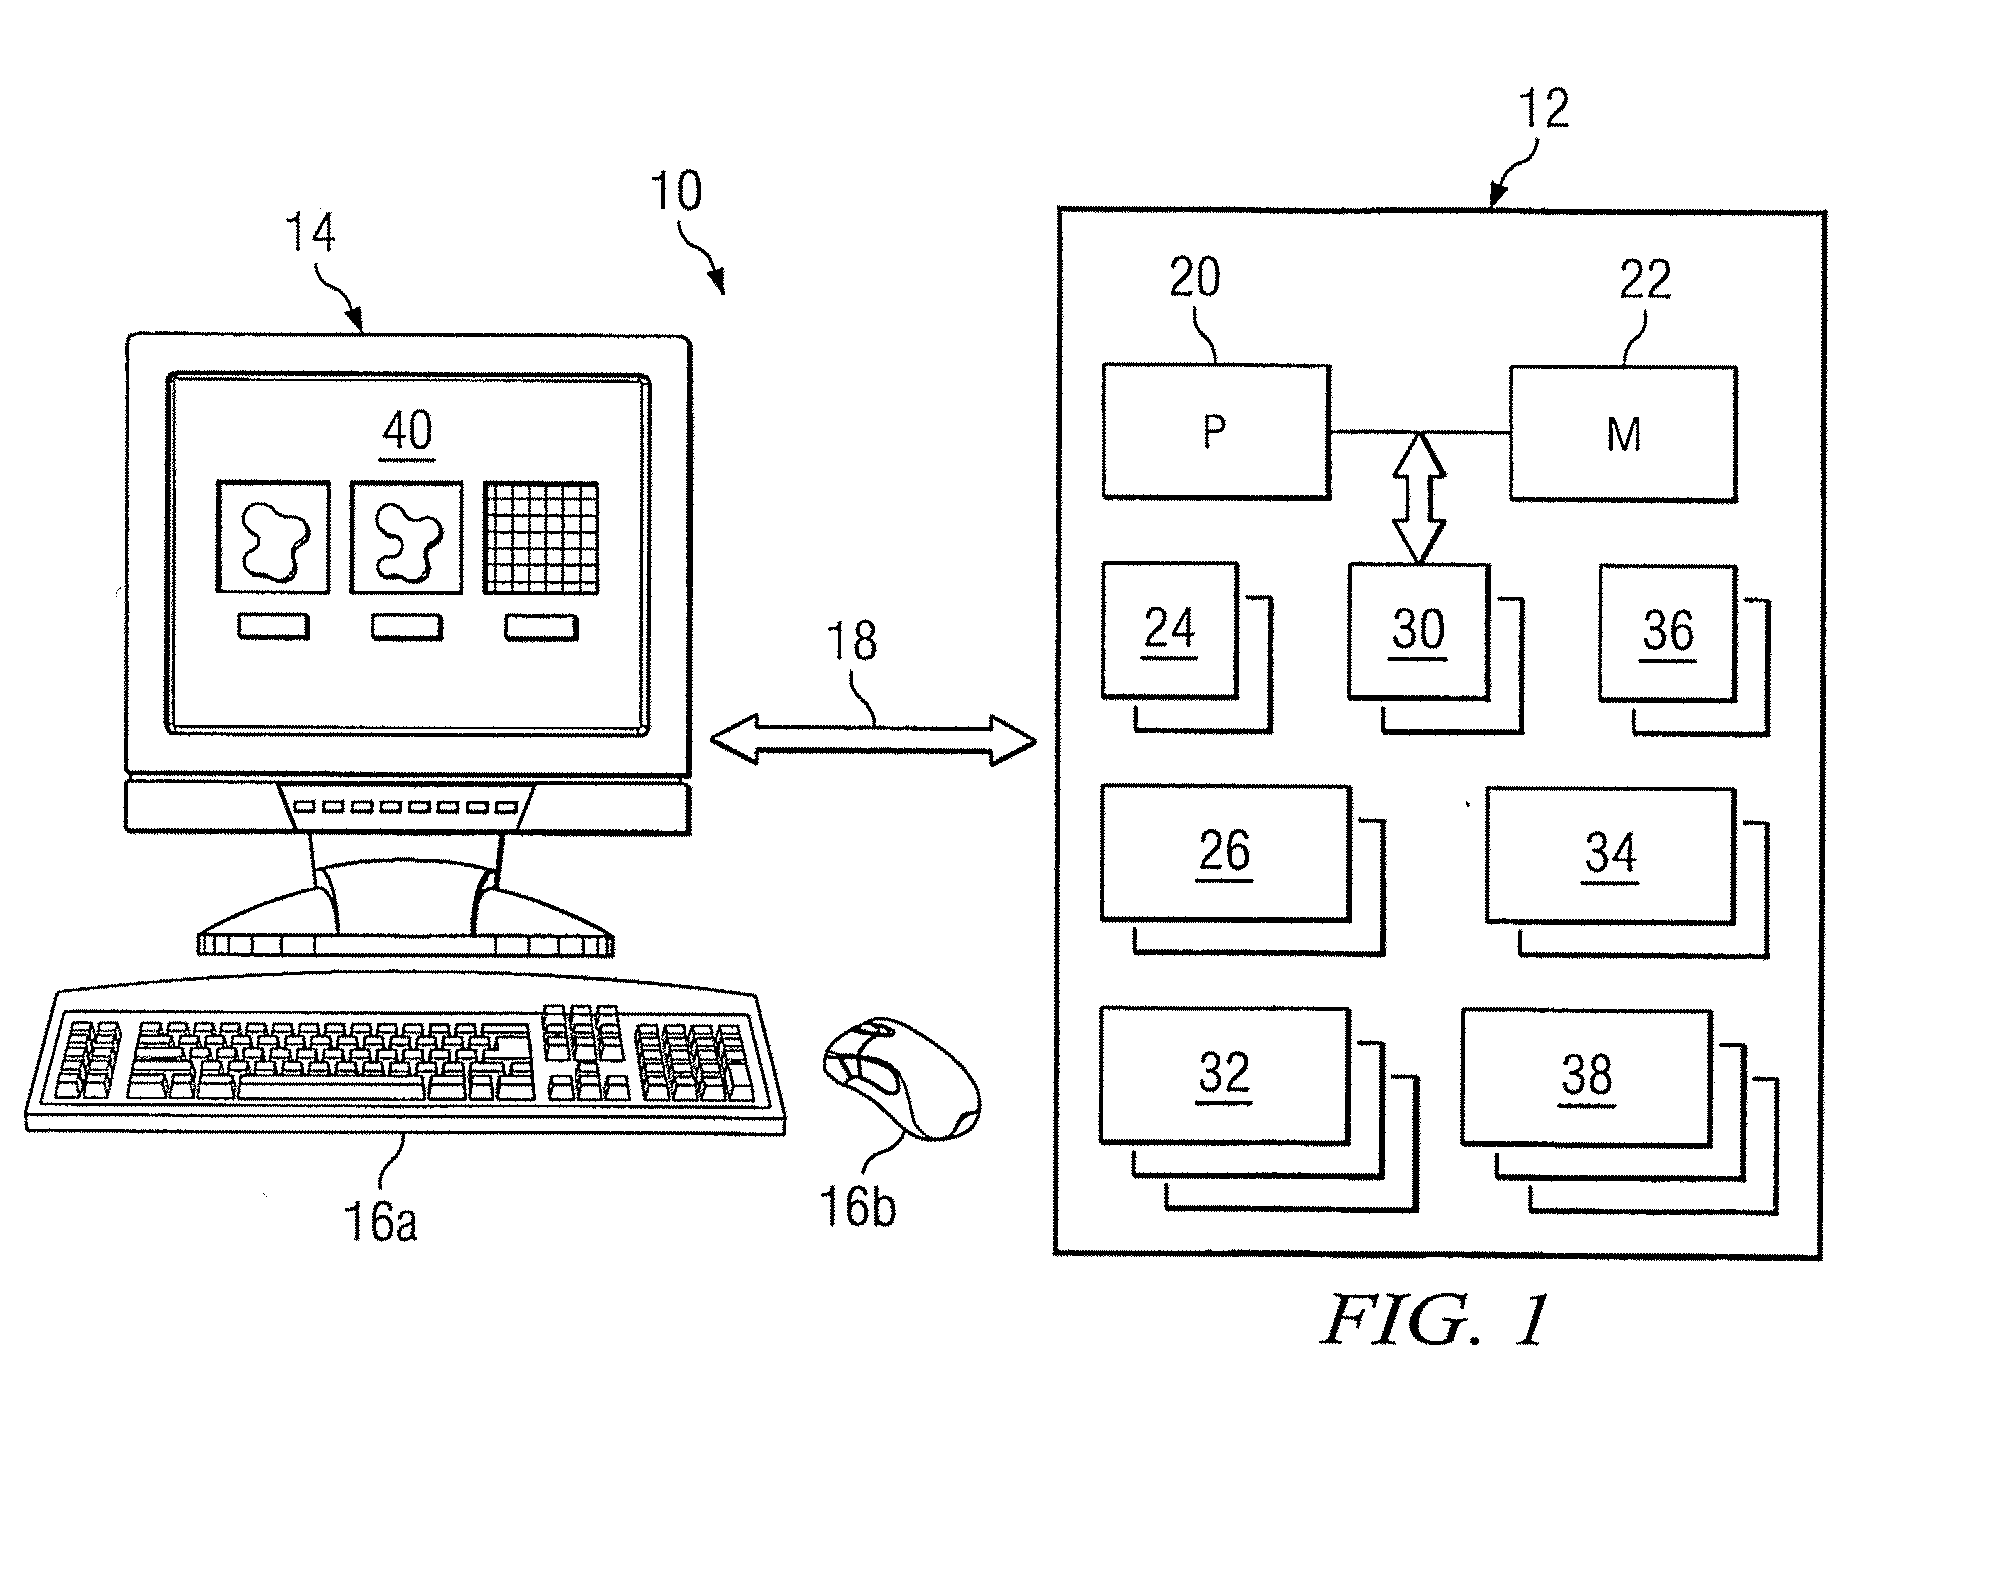 Interactive diagnostic display system